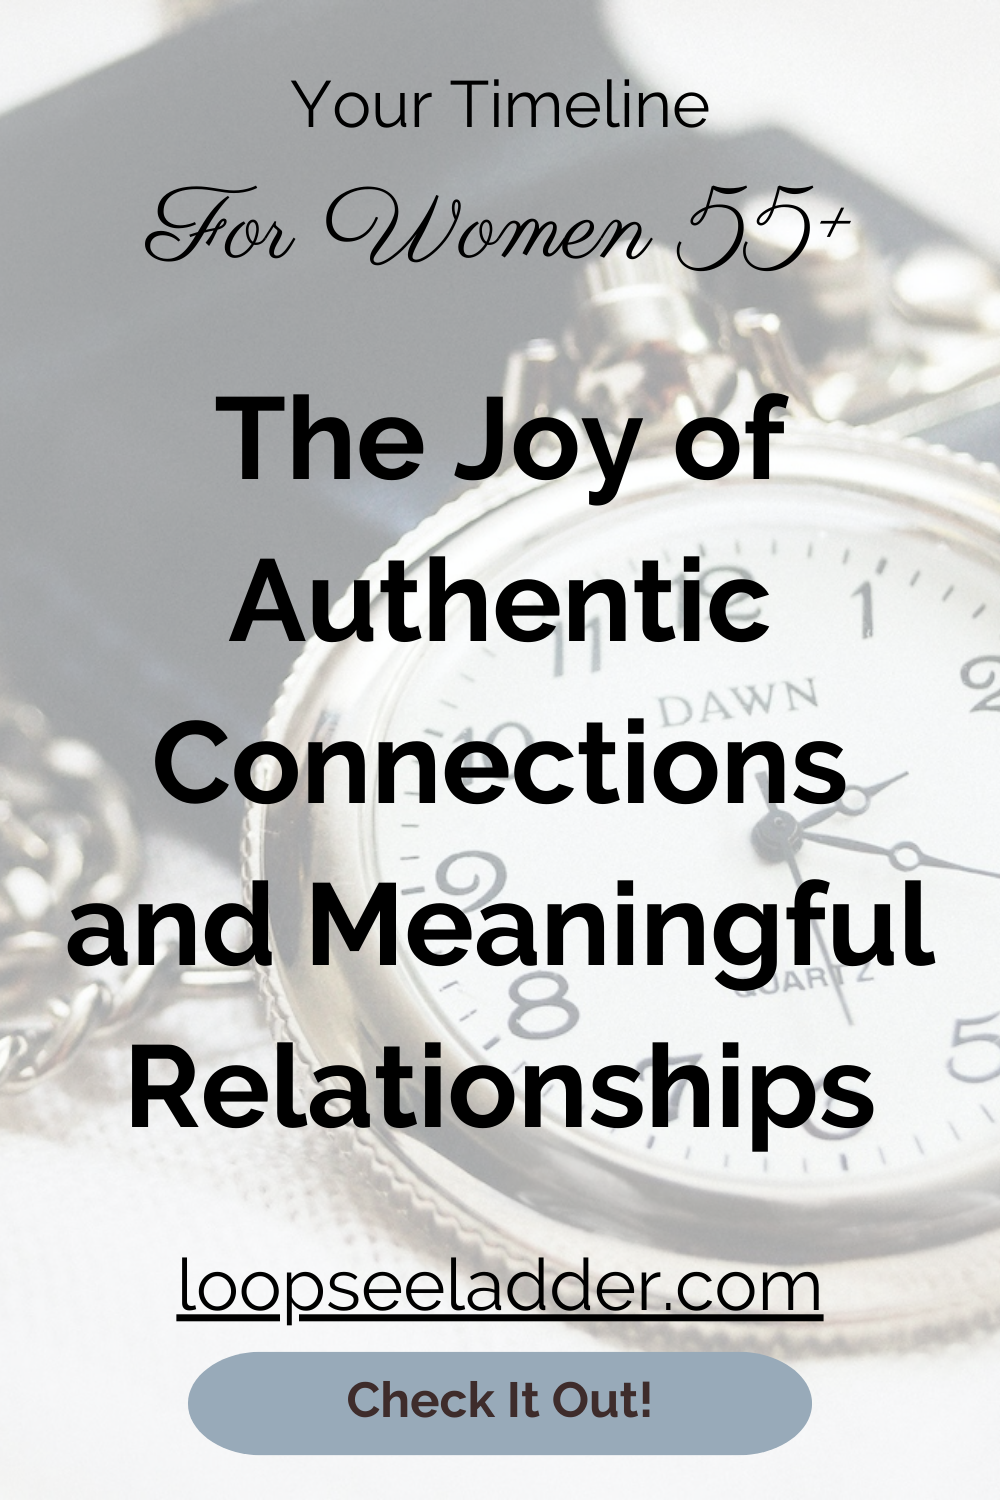 Unleashing the Joy of Authentic Connections: How Women 55+ Can Nurture Meaningful Relationships